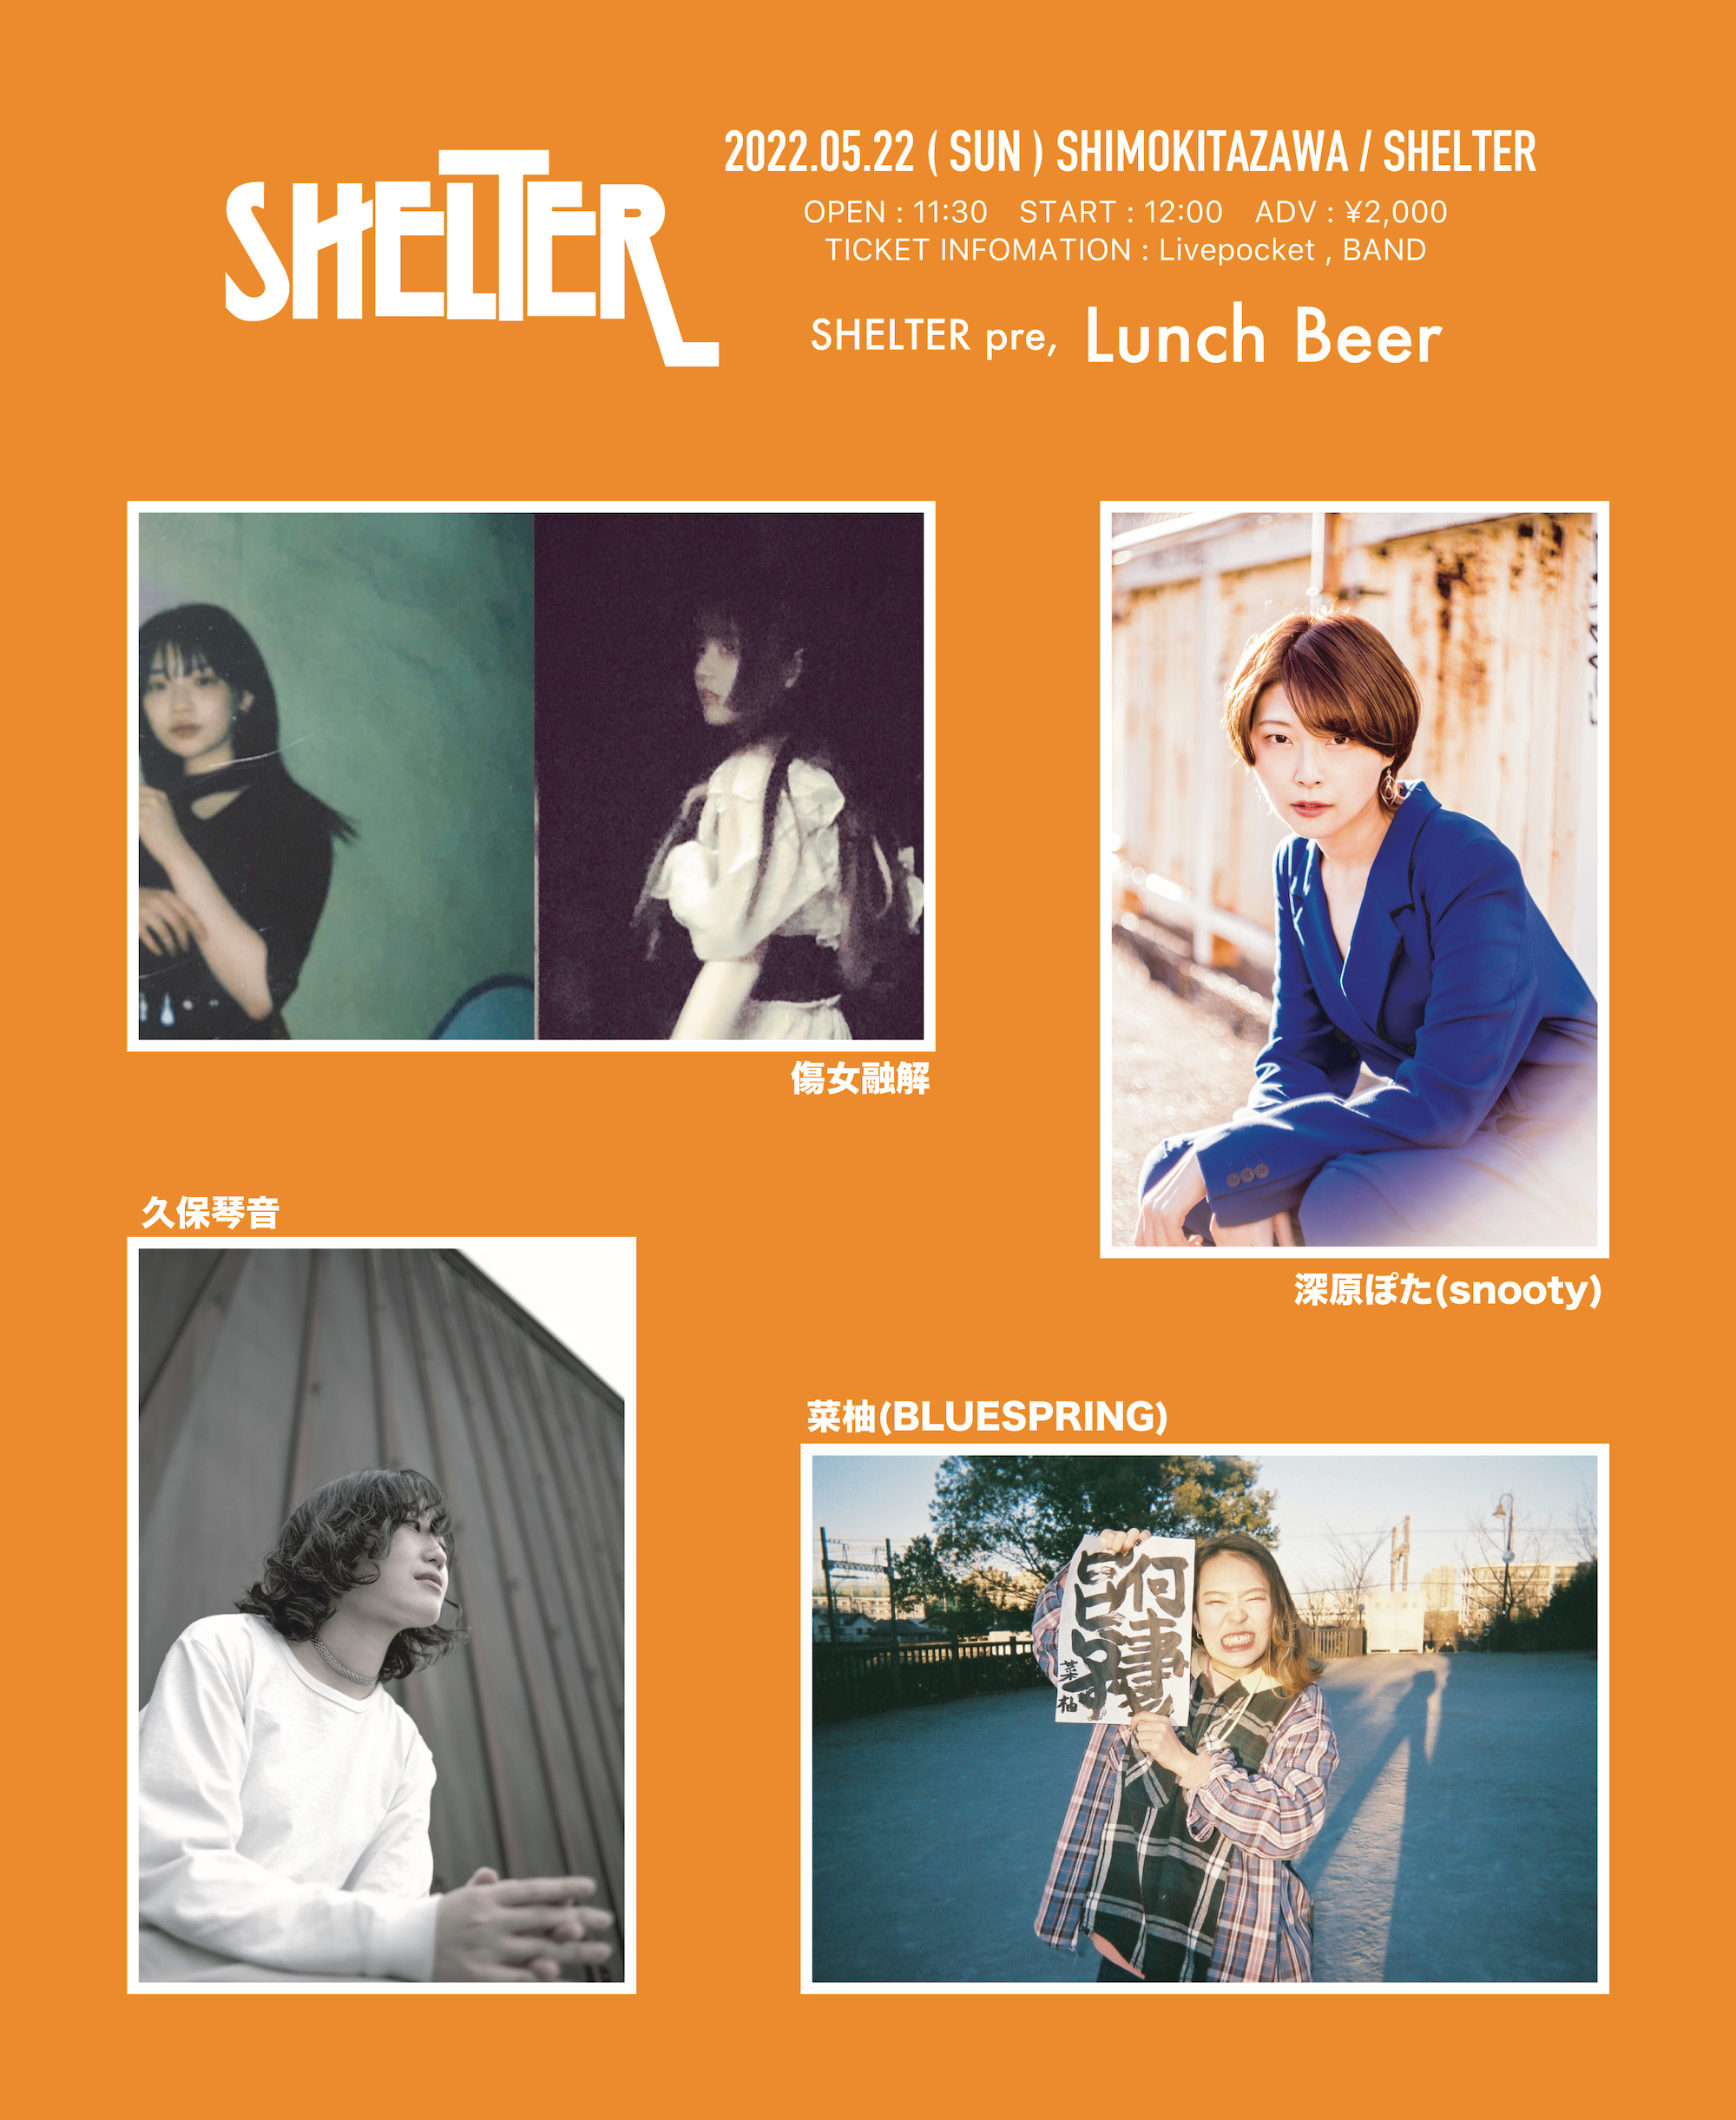 SHELTER pre. “ Lunch Beer “